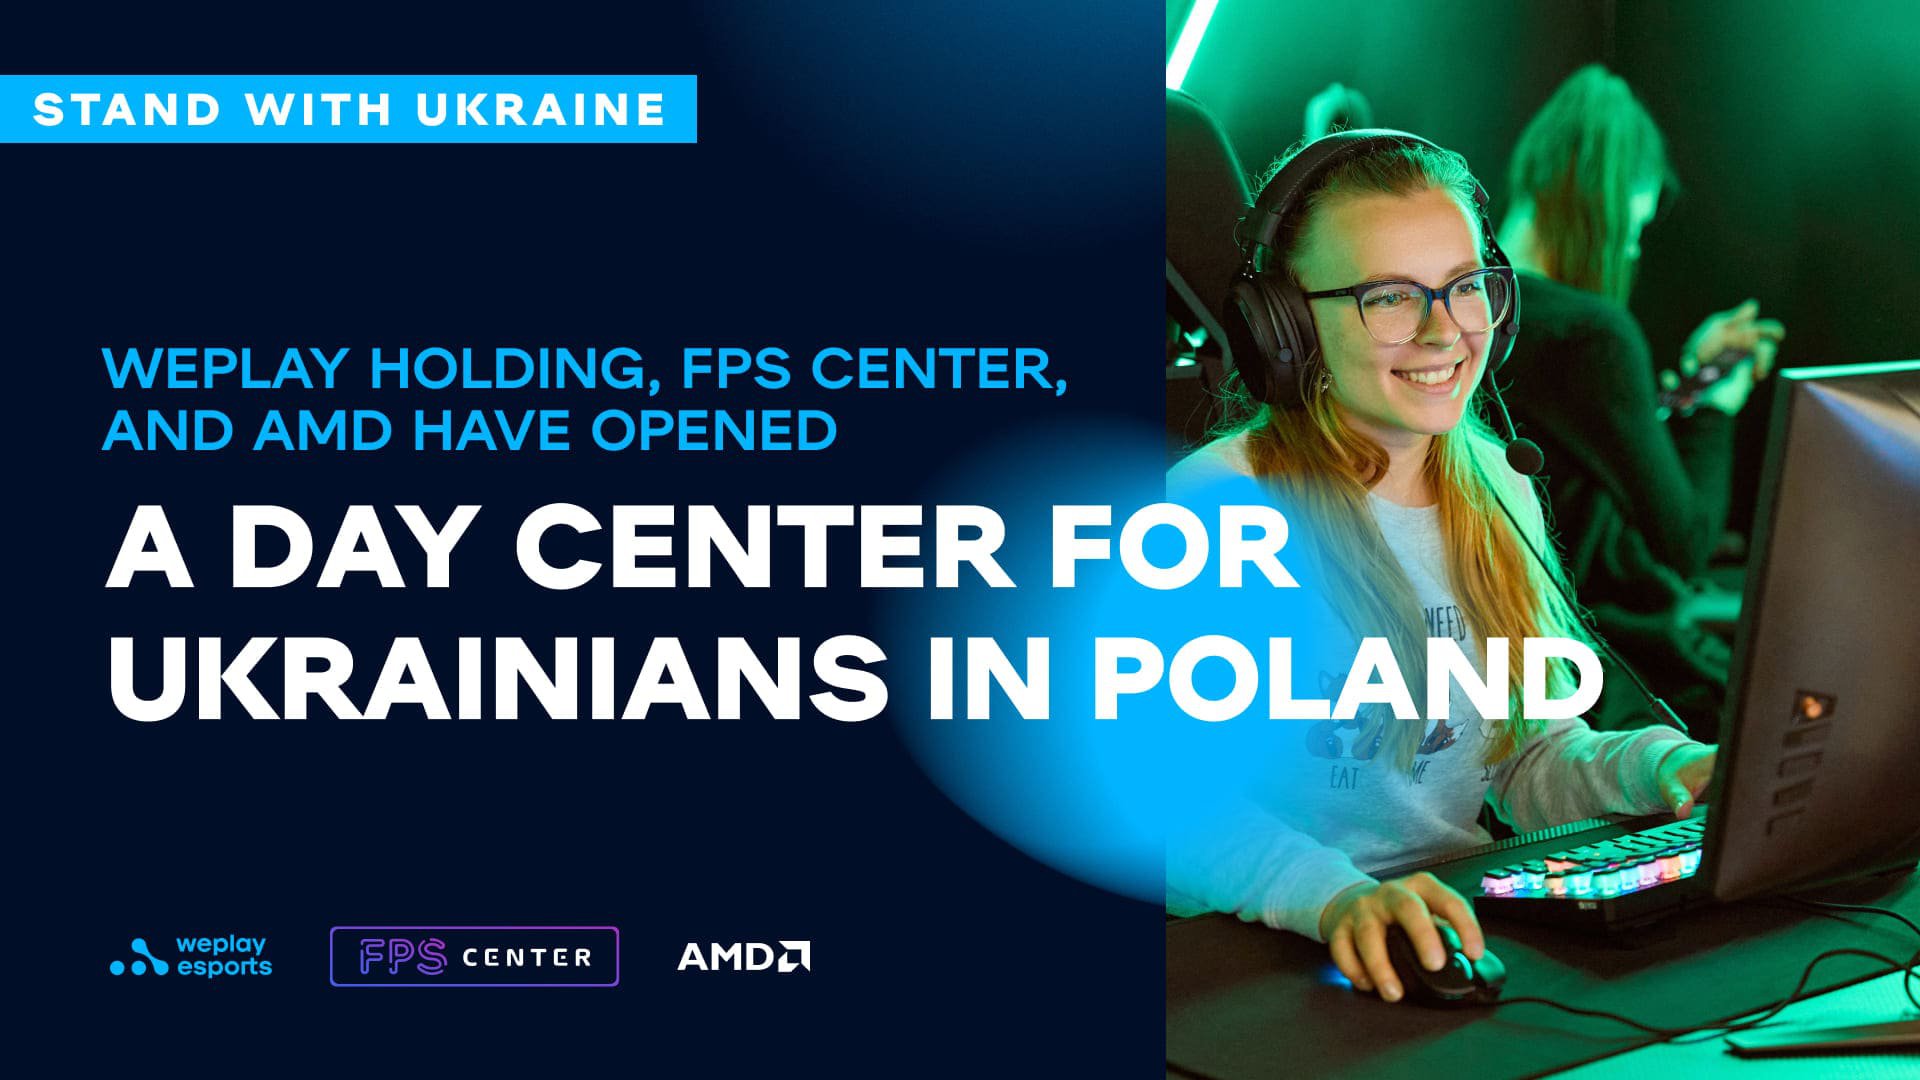 WePlay Holding, FPS Center, and AMD have opened a Day Center for Ukrainians in Poland. Credit: WePlay Holding